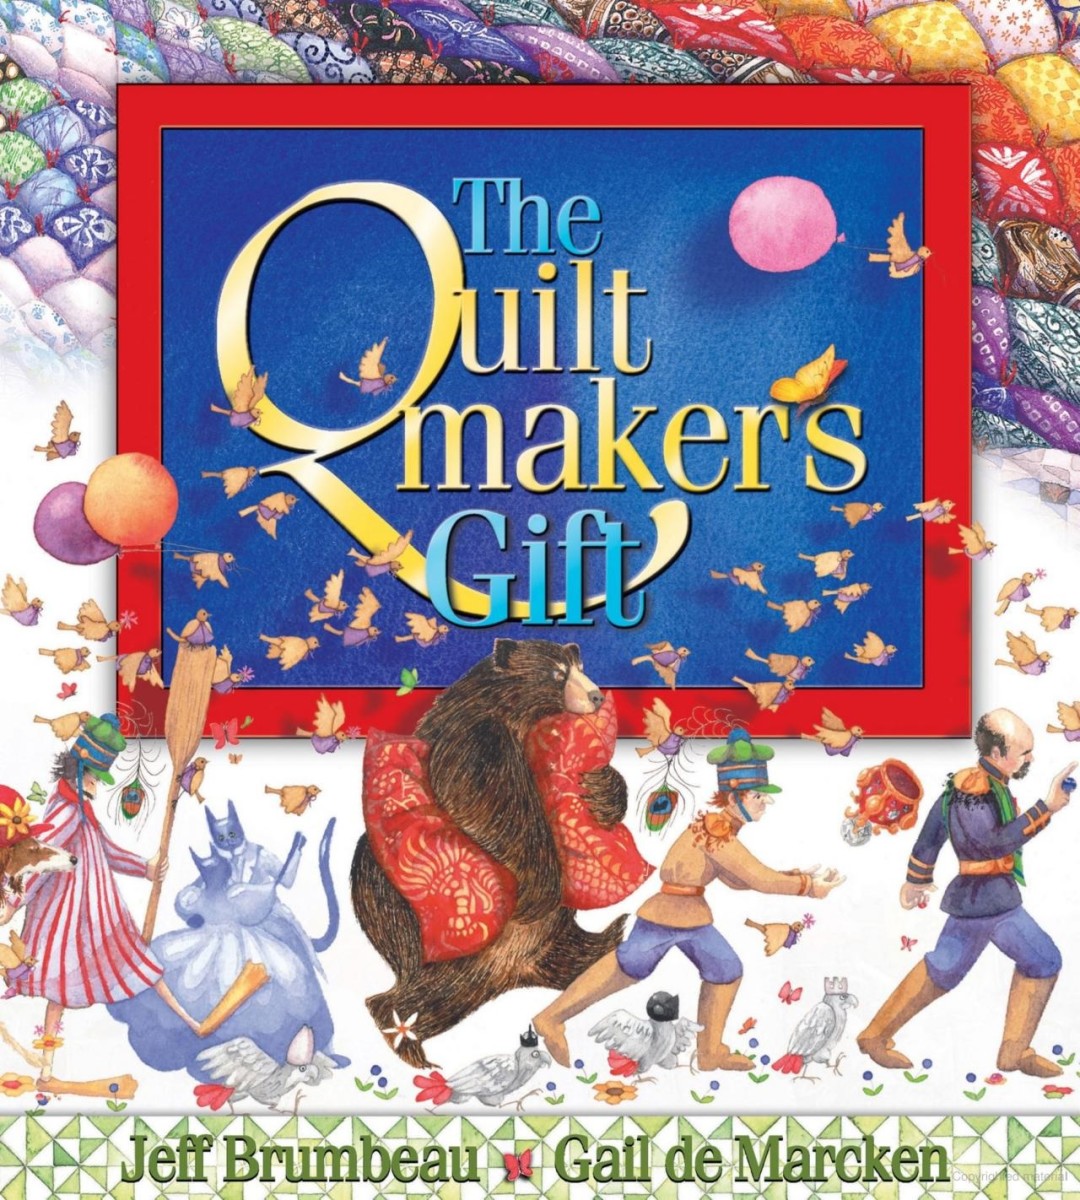 The Quiltmaker's Gift by Jeff Brumbeau and Gail DeMarcken Book Cover